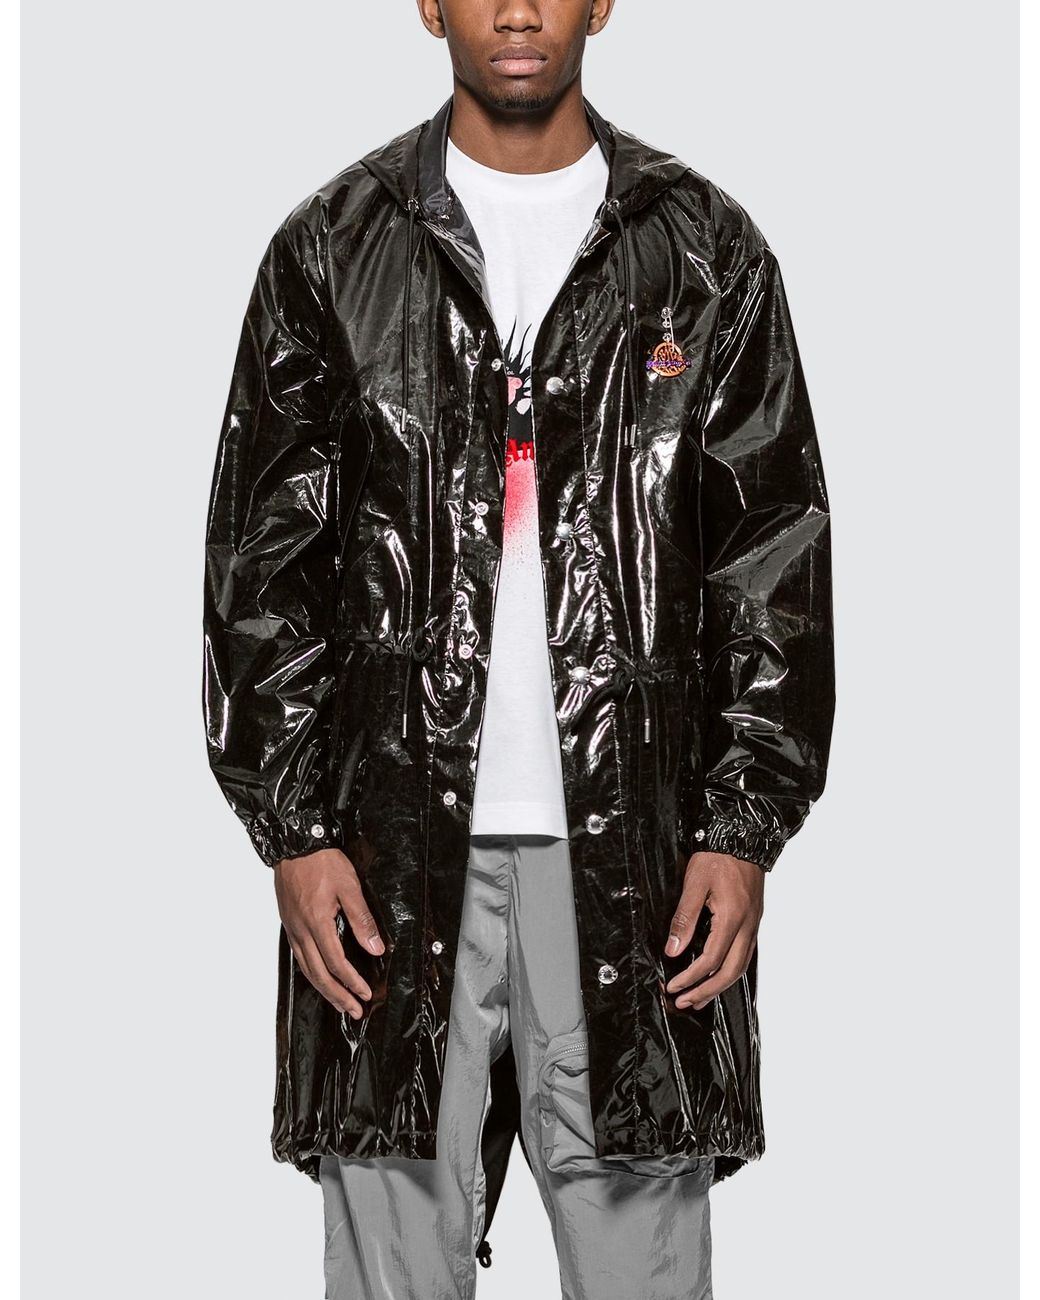 Moncler Genius X Palm Angels Sid Jacket in Black for Men - Lyst